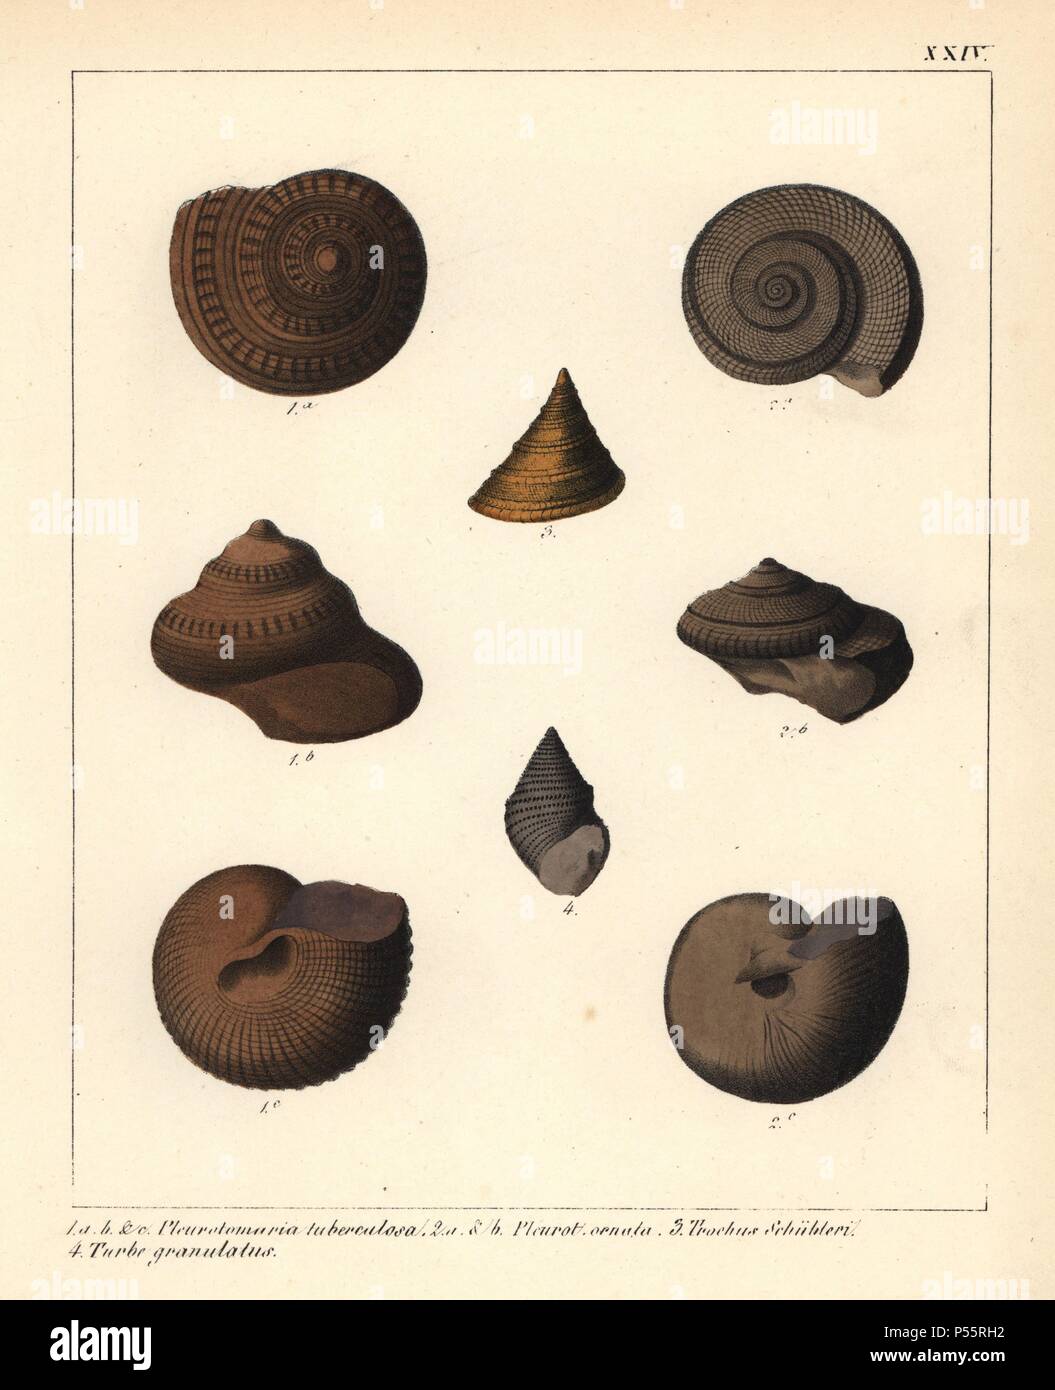 Extinct fossil sea snails: Pleurotomaria tuberculosa, P. oenata, Trochus Schubleri and Turbo granulatus. Handcoloured lithograph by an unknown artist from Dr. F.A. Schmidt's 'Petrefactenbuch,' published in Stuttgart, Germany, 1855 by Verlag von Krais & Hoffmann. Dr. Schmidt's 'Book of Petrification' introduced fossils and palaeontology to both the specialist and general reader. Stock Photo